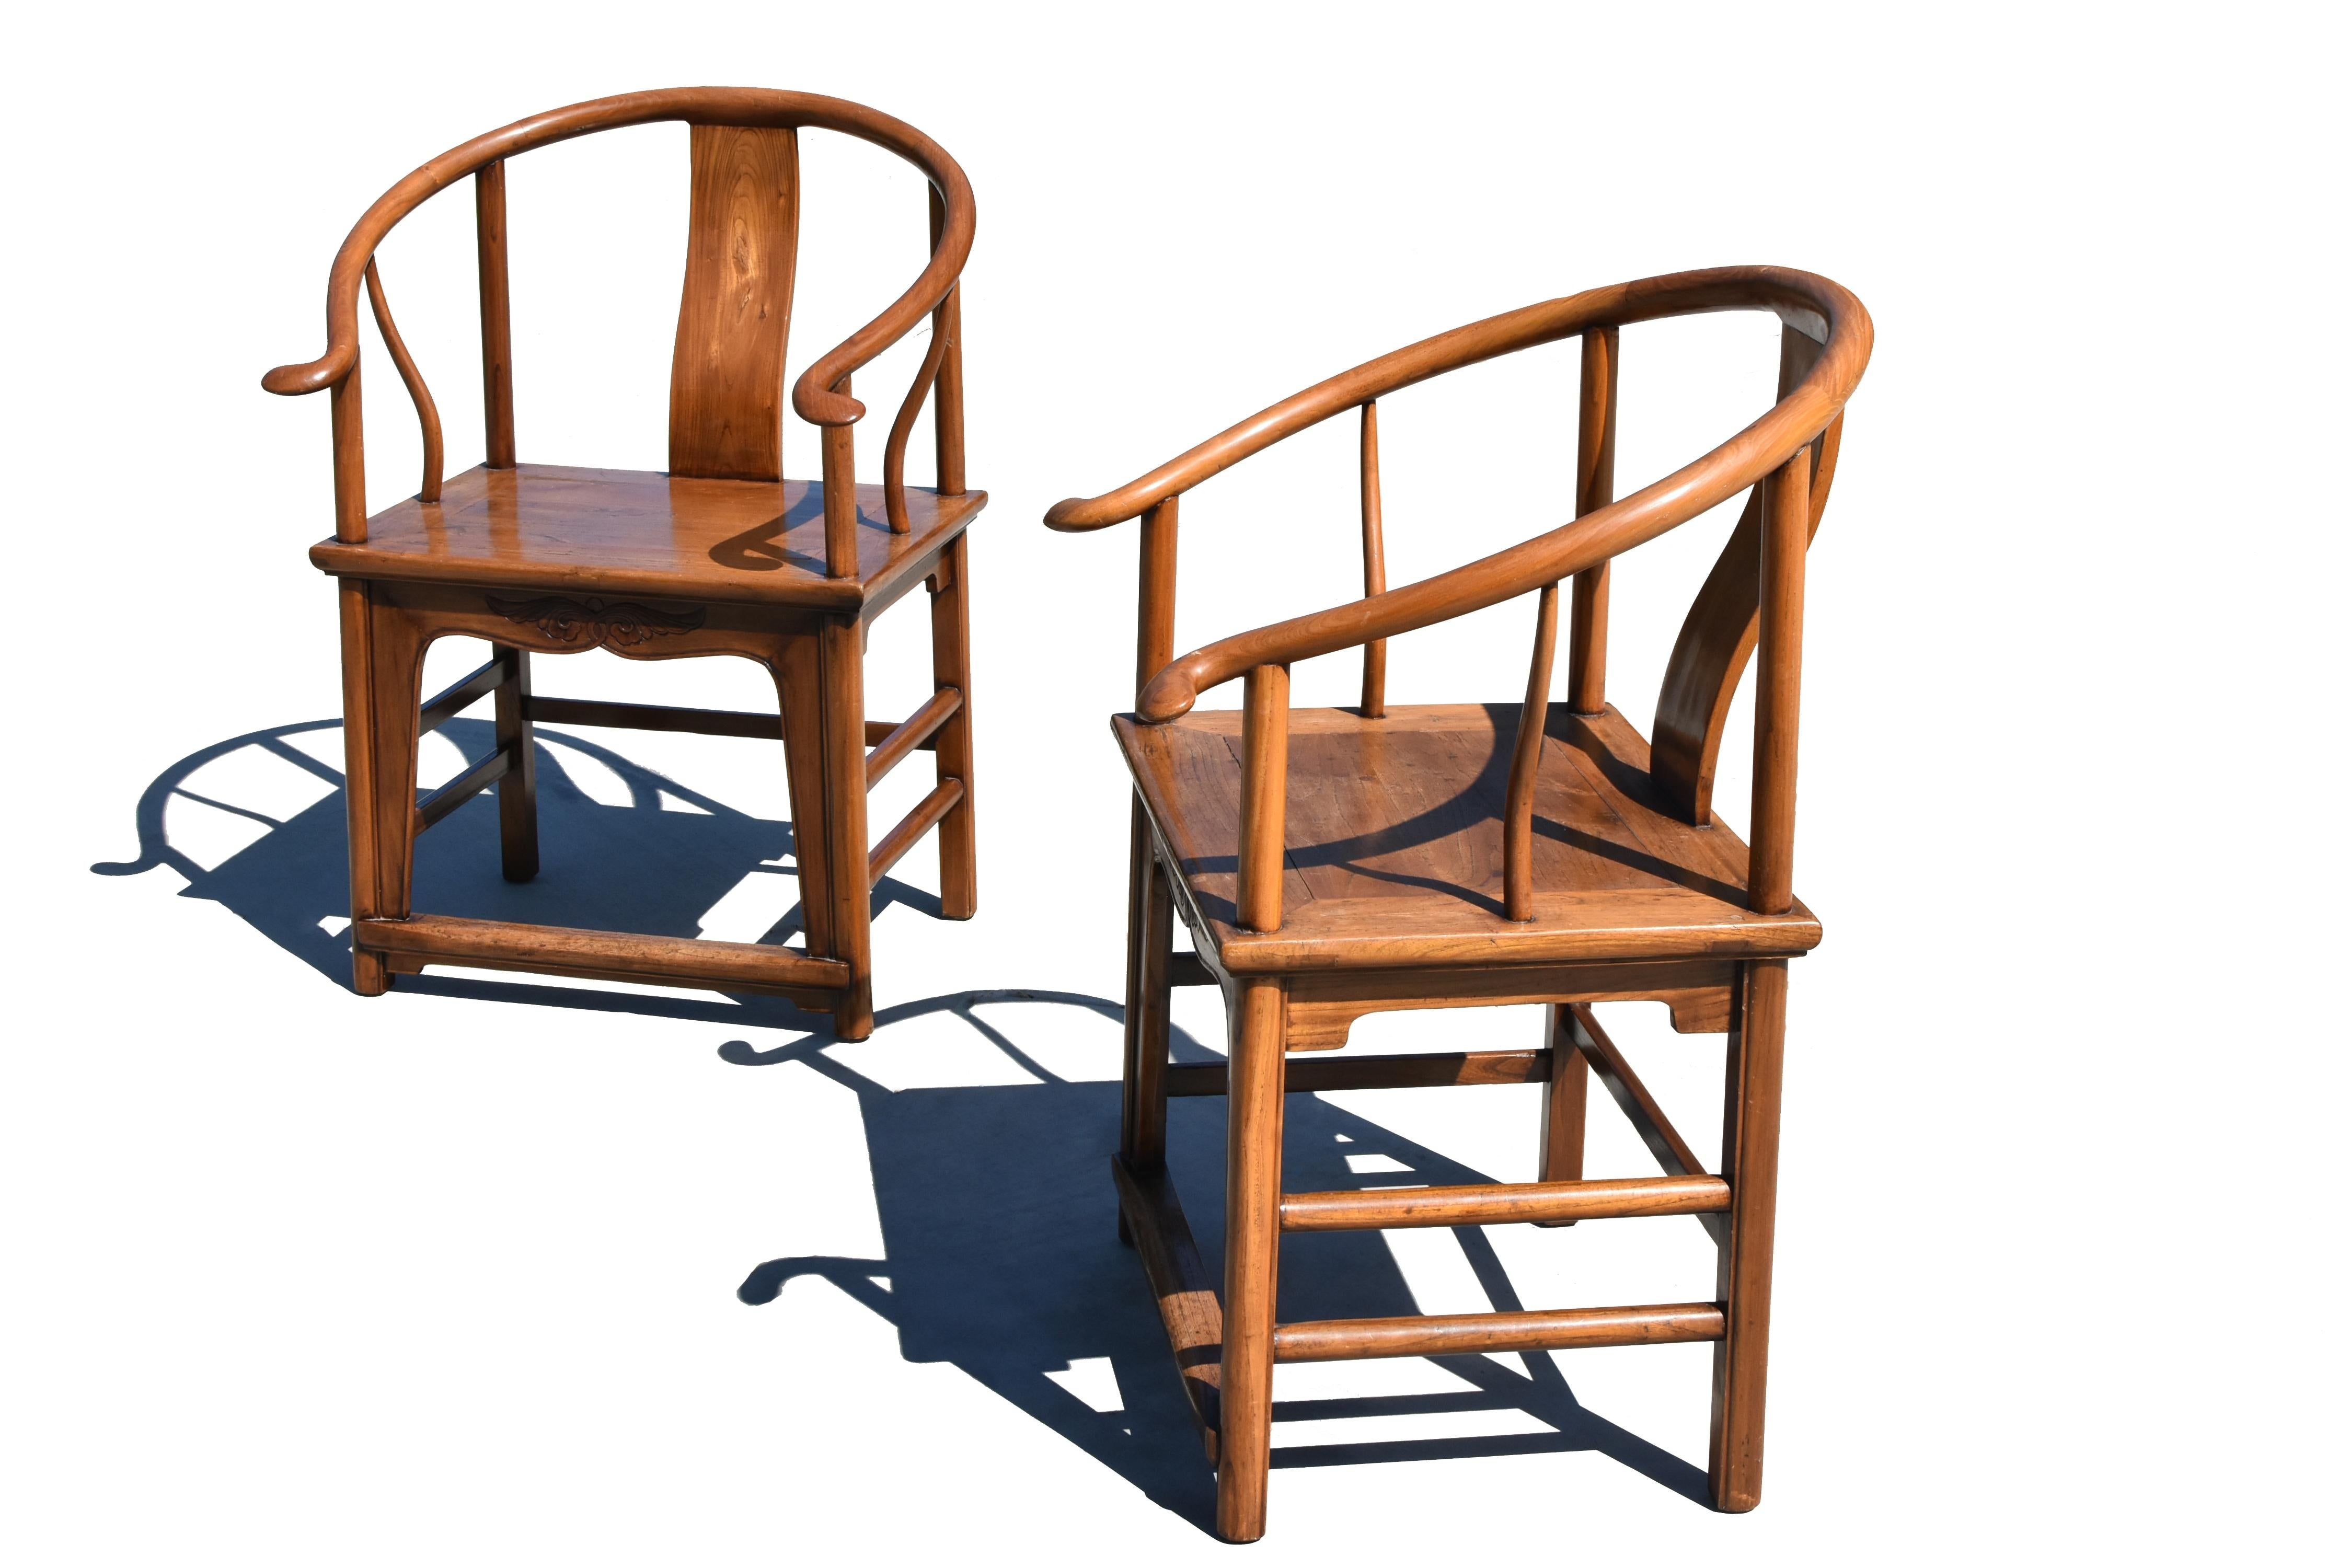 A pair of extra large, sold wood, 19th century Chinese Horseshoe Chairs. The solid, 2